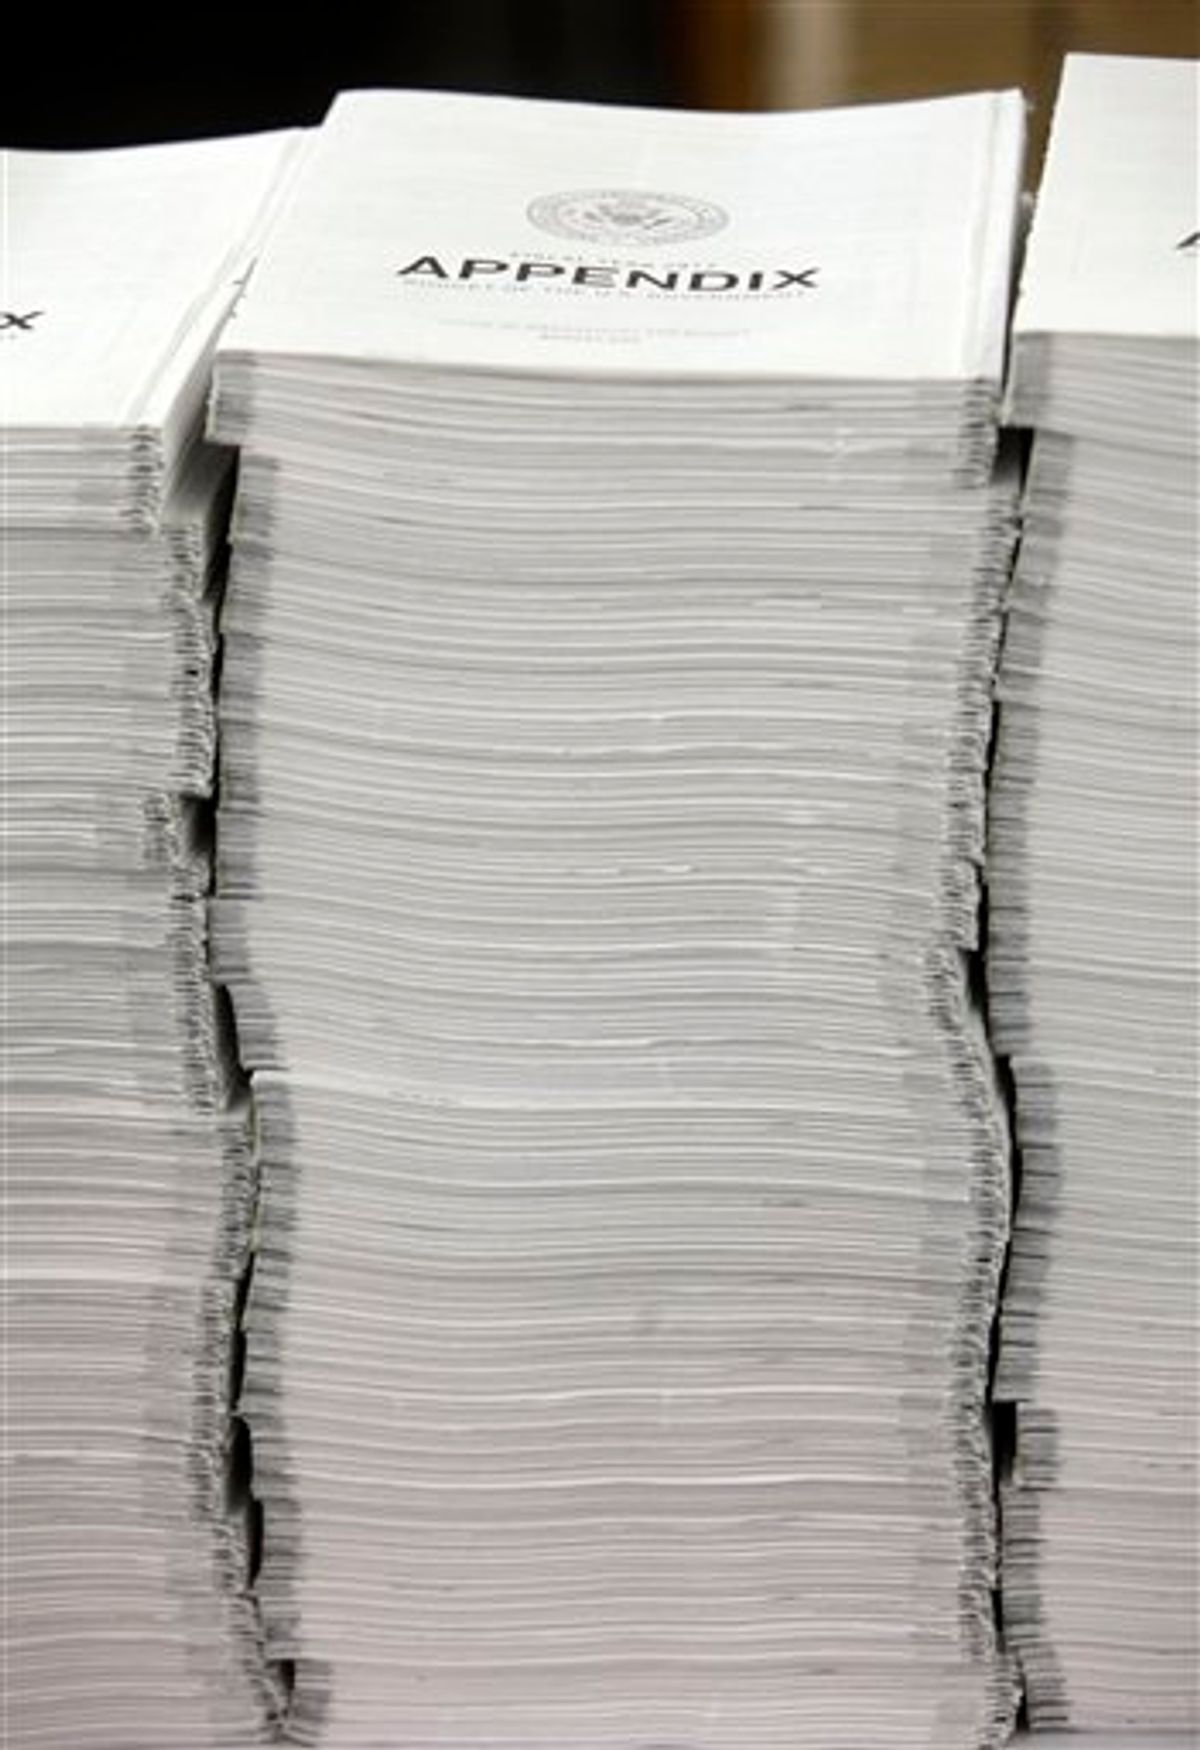 In this photo taken Feb. 10, 2011, stacks of the appendix of the 2012 budget wait to be bound at the U.S. Government Printing Office at Washington. President Barack Obama Obama will send his 2012 budget proposal to Congress on Monday, Feb. 14.  According to an Office of Management and Budget summary obtained by The Associated Press, the administration will propose more than $1 trillion in deficit reduction over the next decade with two-thirds of that amount coming from spending cuts.  (AP Photo/Jacquelyn Martin) (AP)